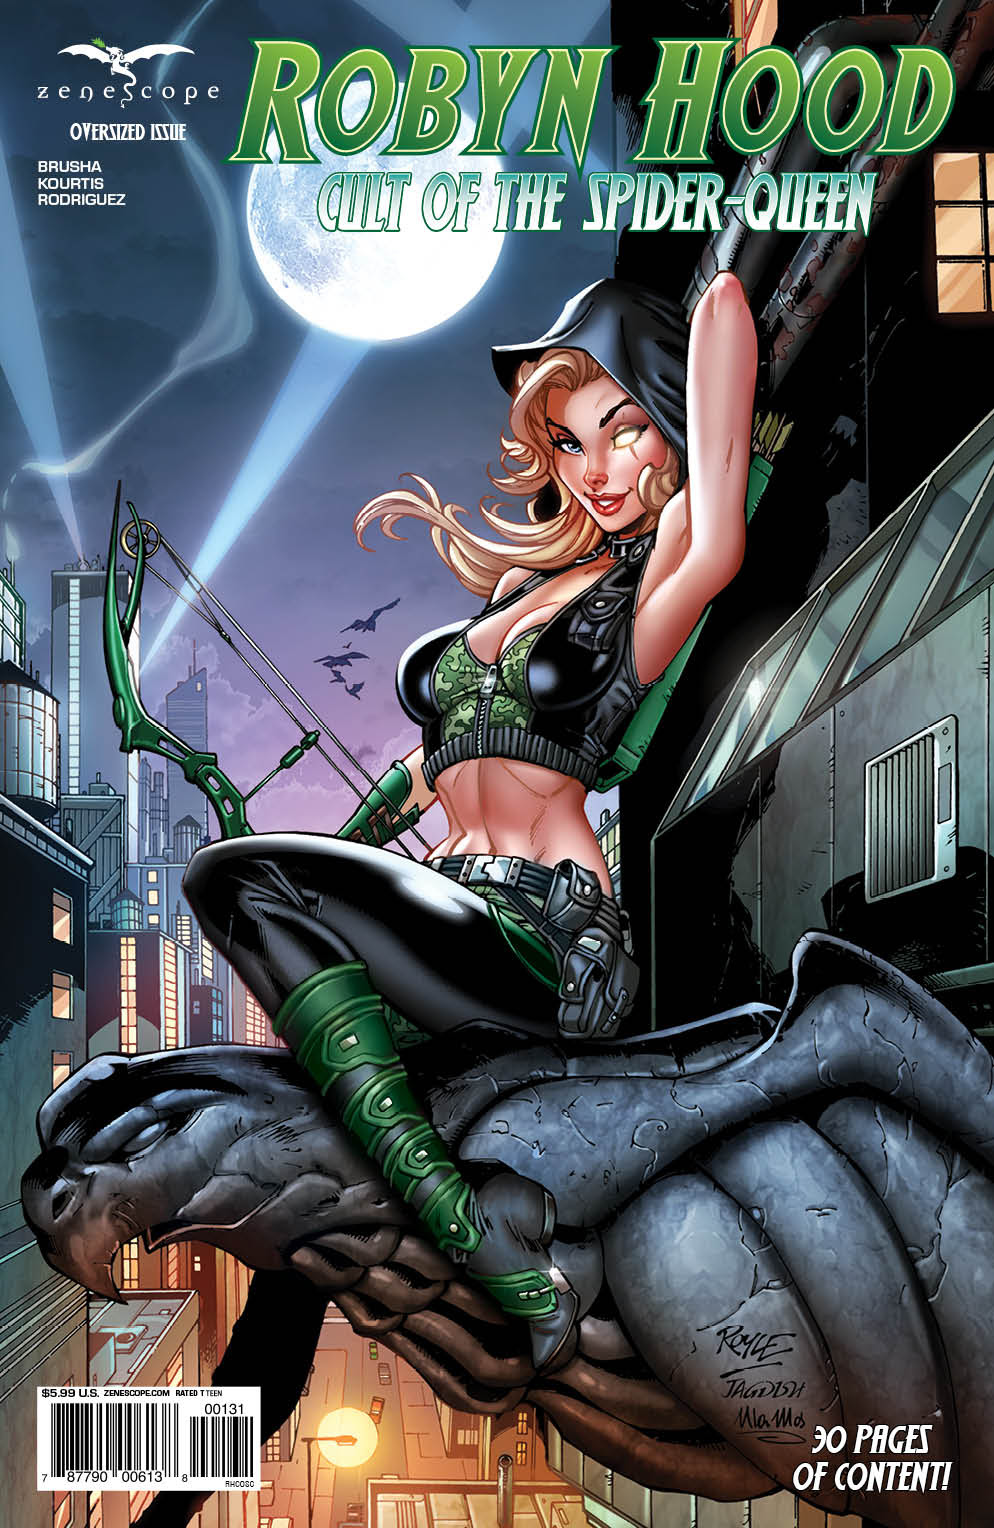 Robyn Hood - Cult of the Spider-Queen, cover C